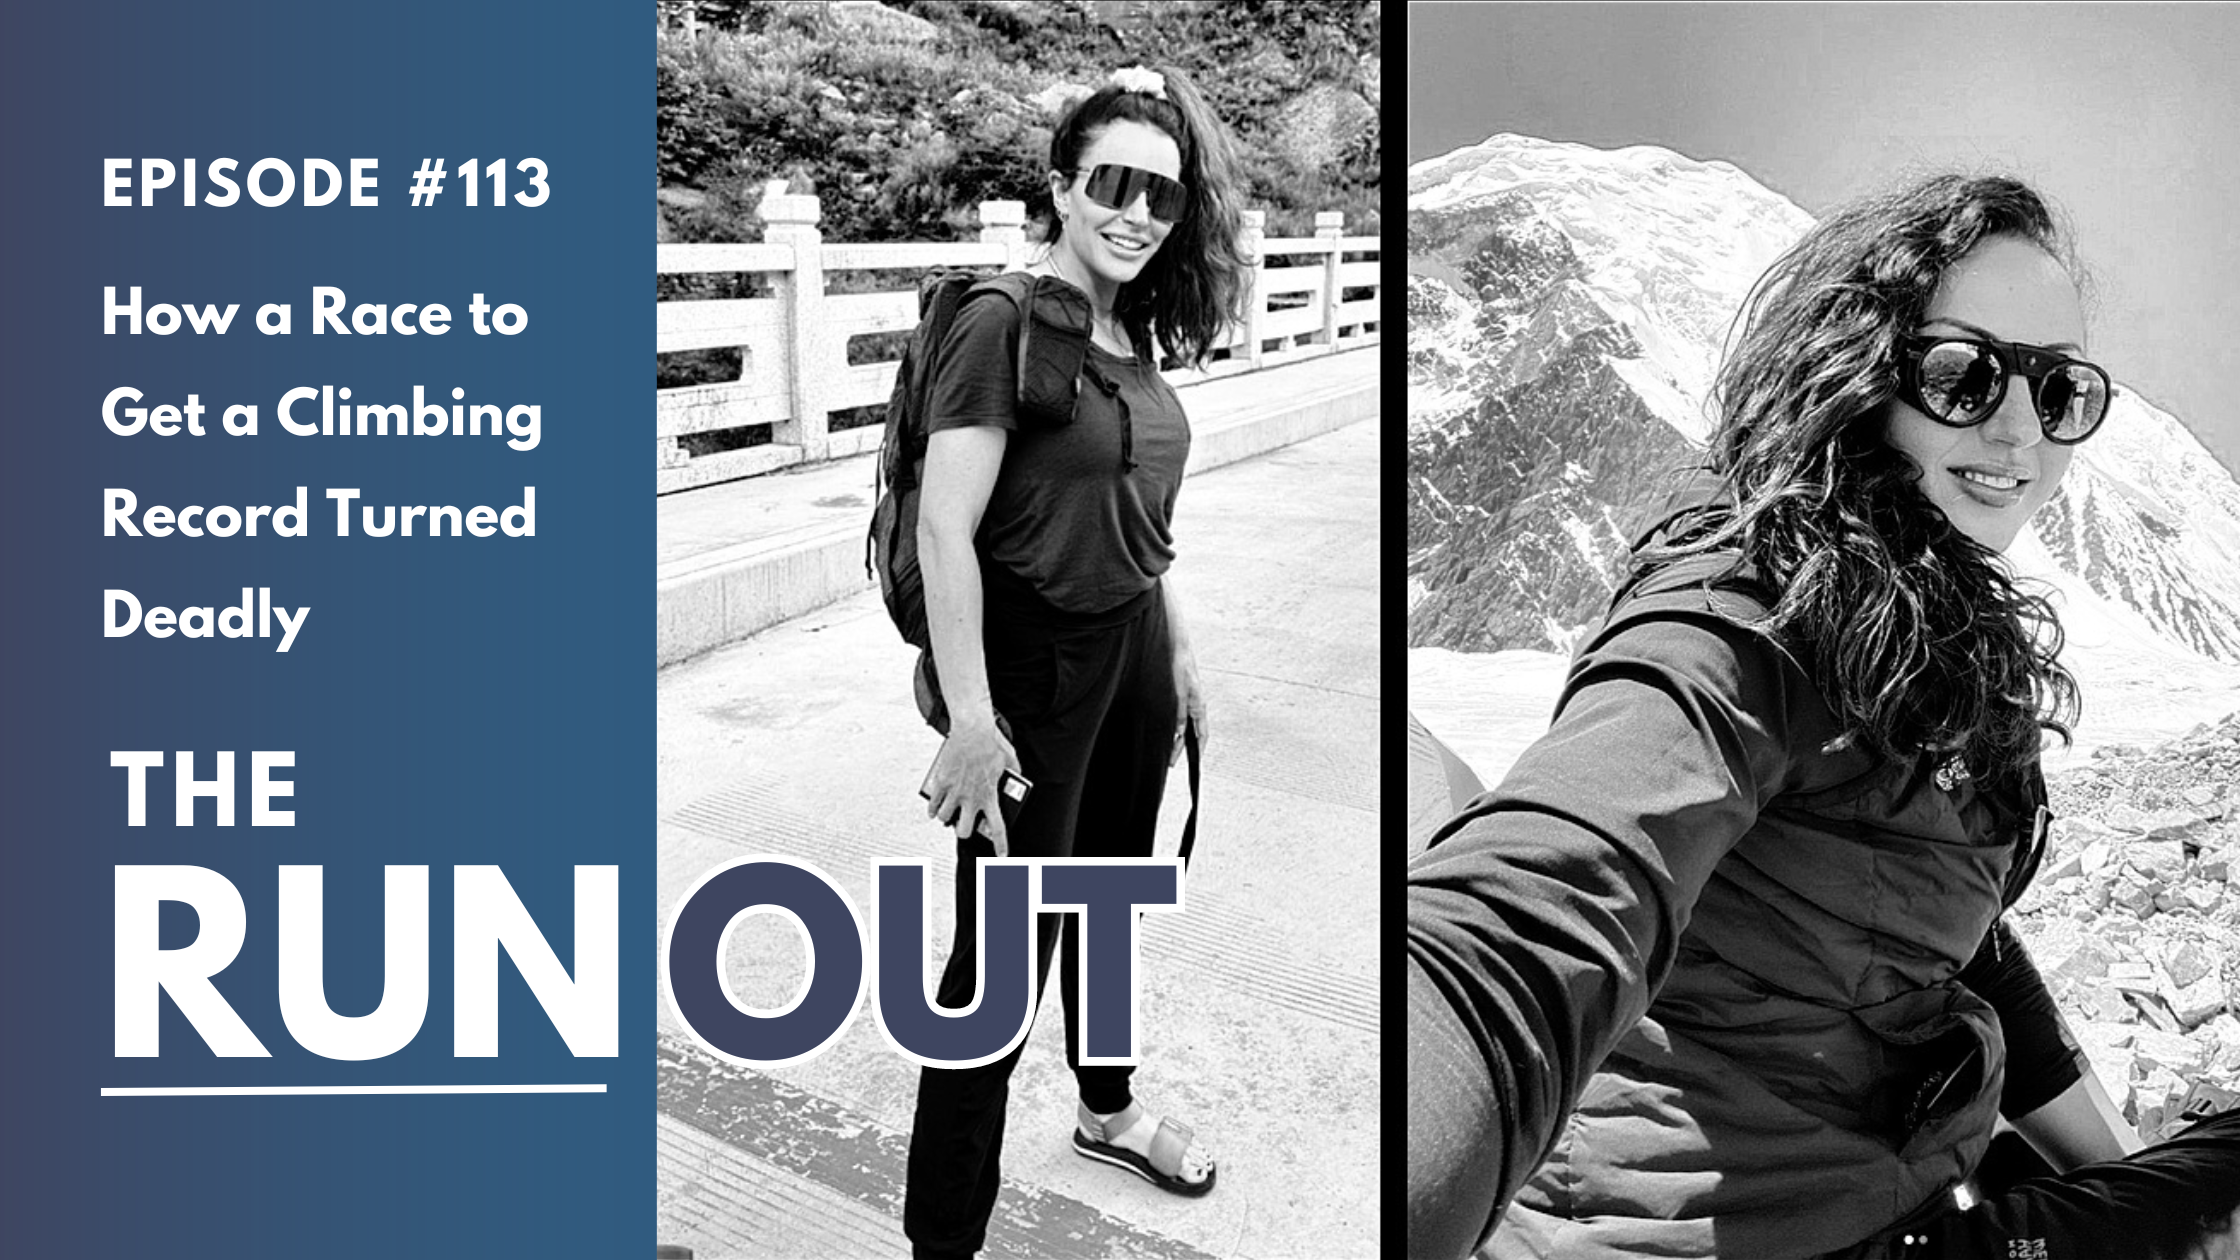 RunOut #113: How a Race to Get a Climbing Record Turned Deadly